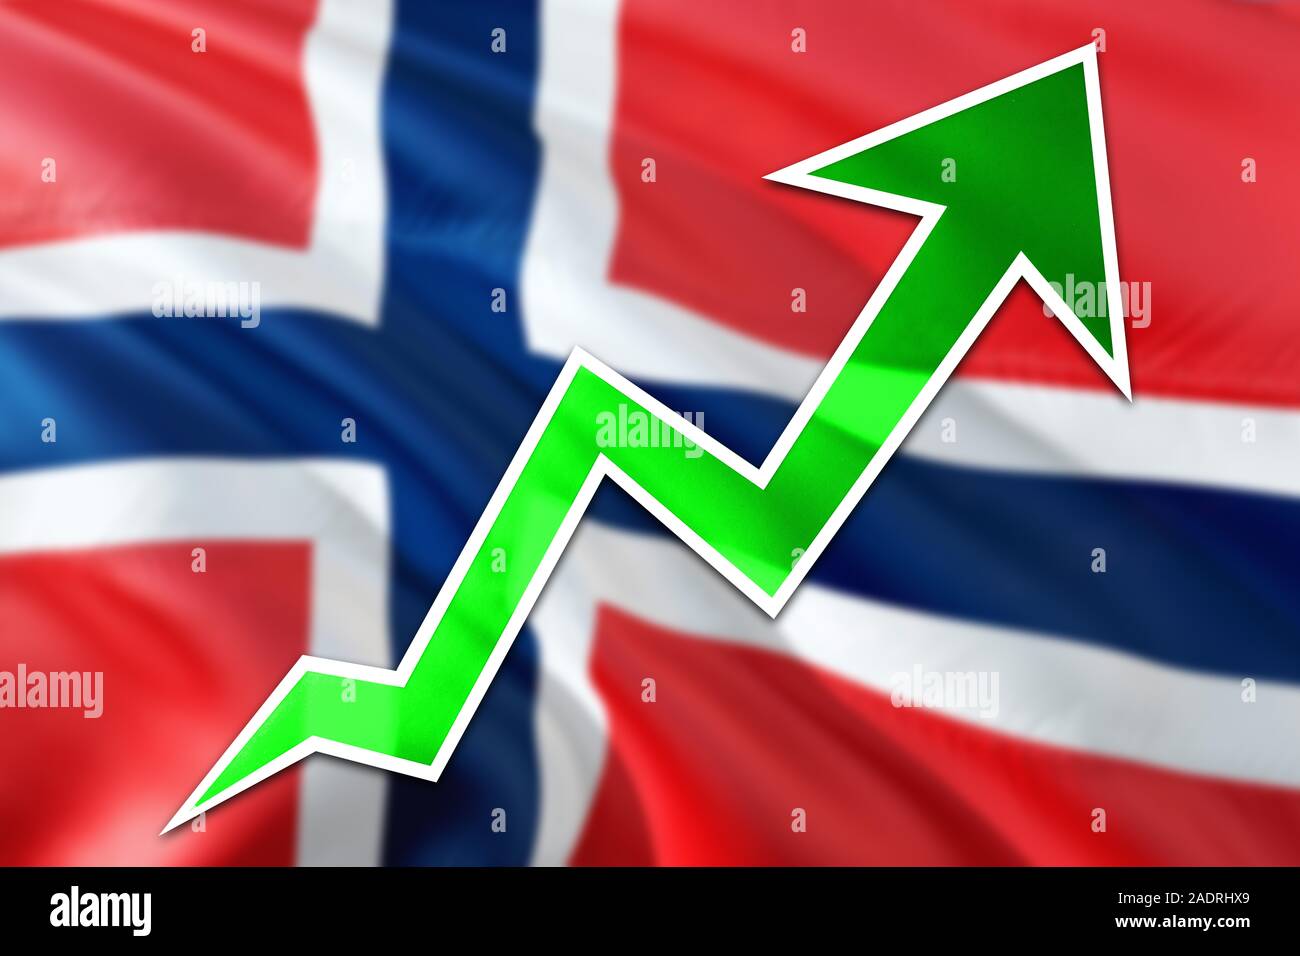 norway economy graph is indicating positive growth, green arrow going up with trend line. business concept on national background stock photo - alamy